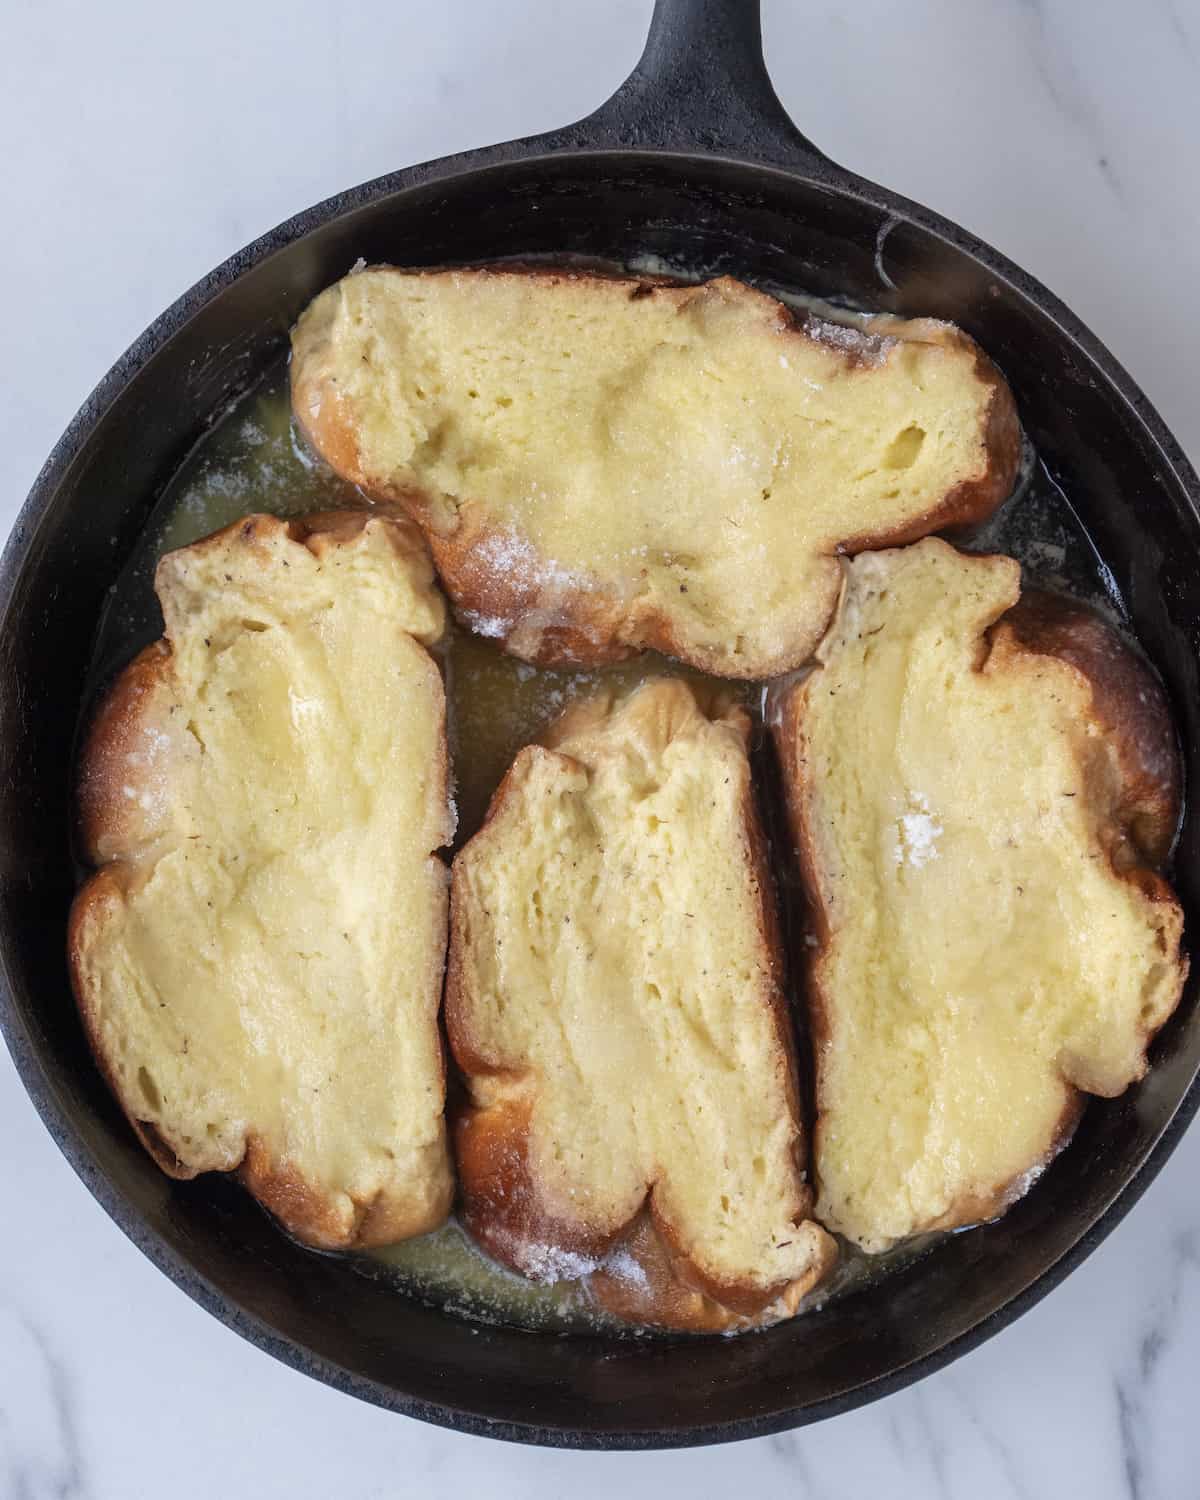 Bread slices soaked into french toast batter being cooked on a skillet.